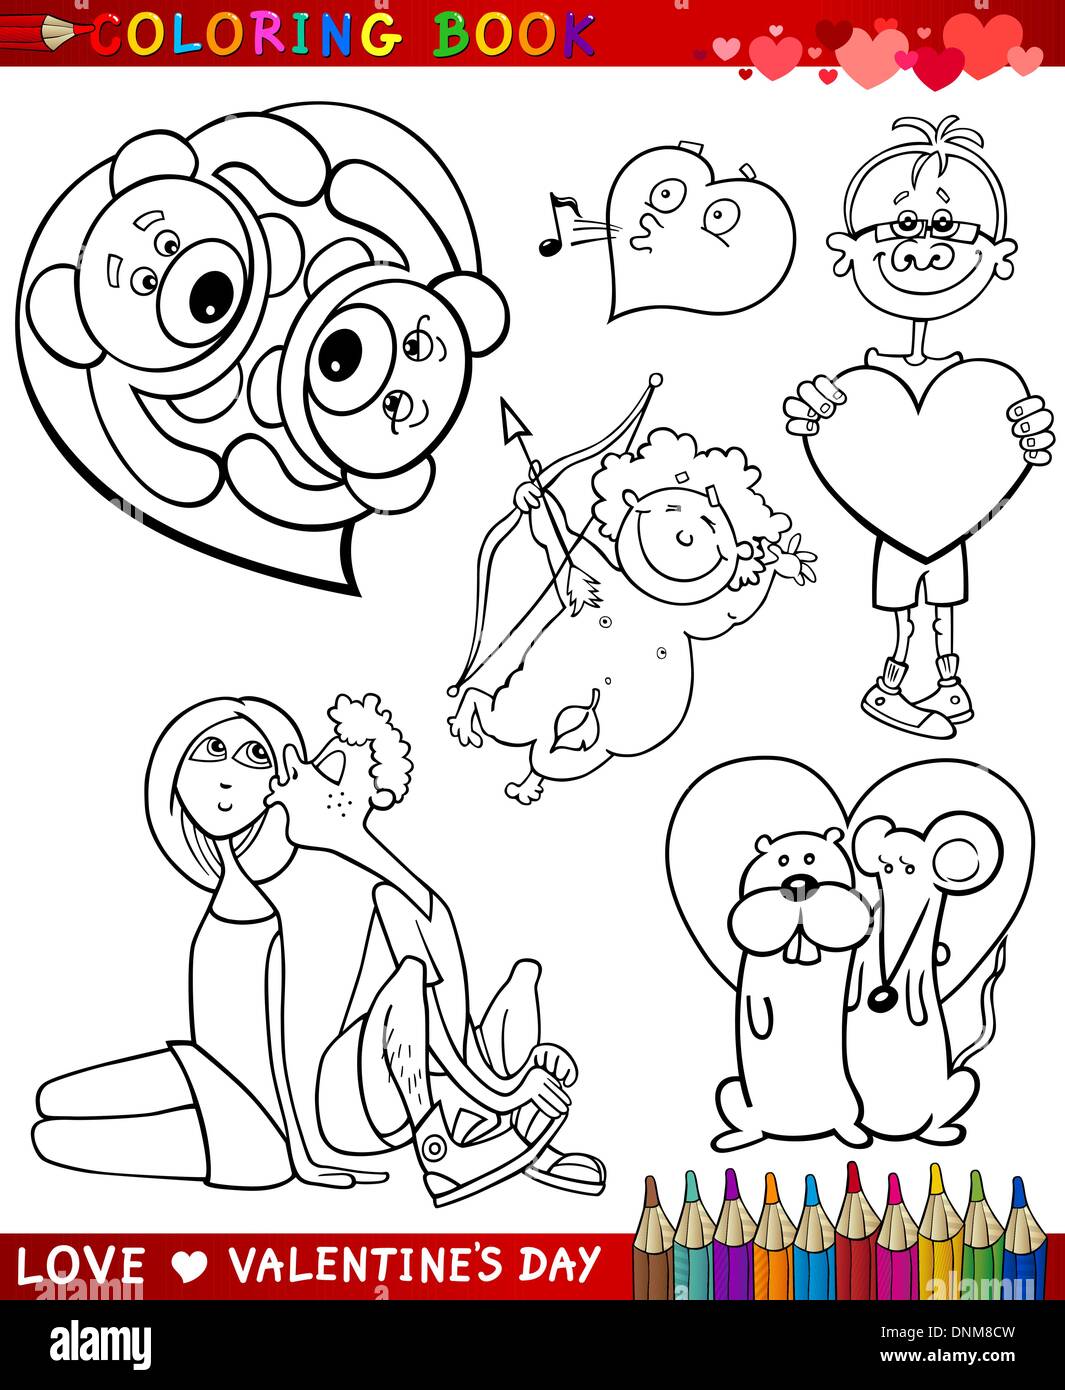 Valentines Day and Love Themes Collection Set of Black and White Cartoon Illustrations for Coloring Book Stock Vector